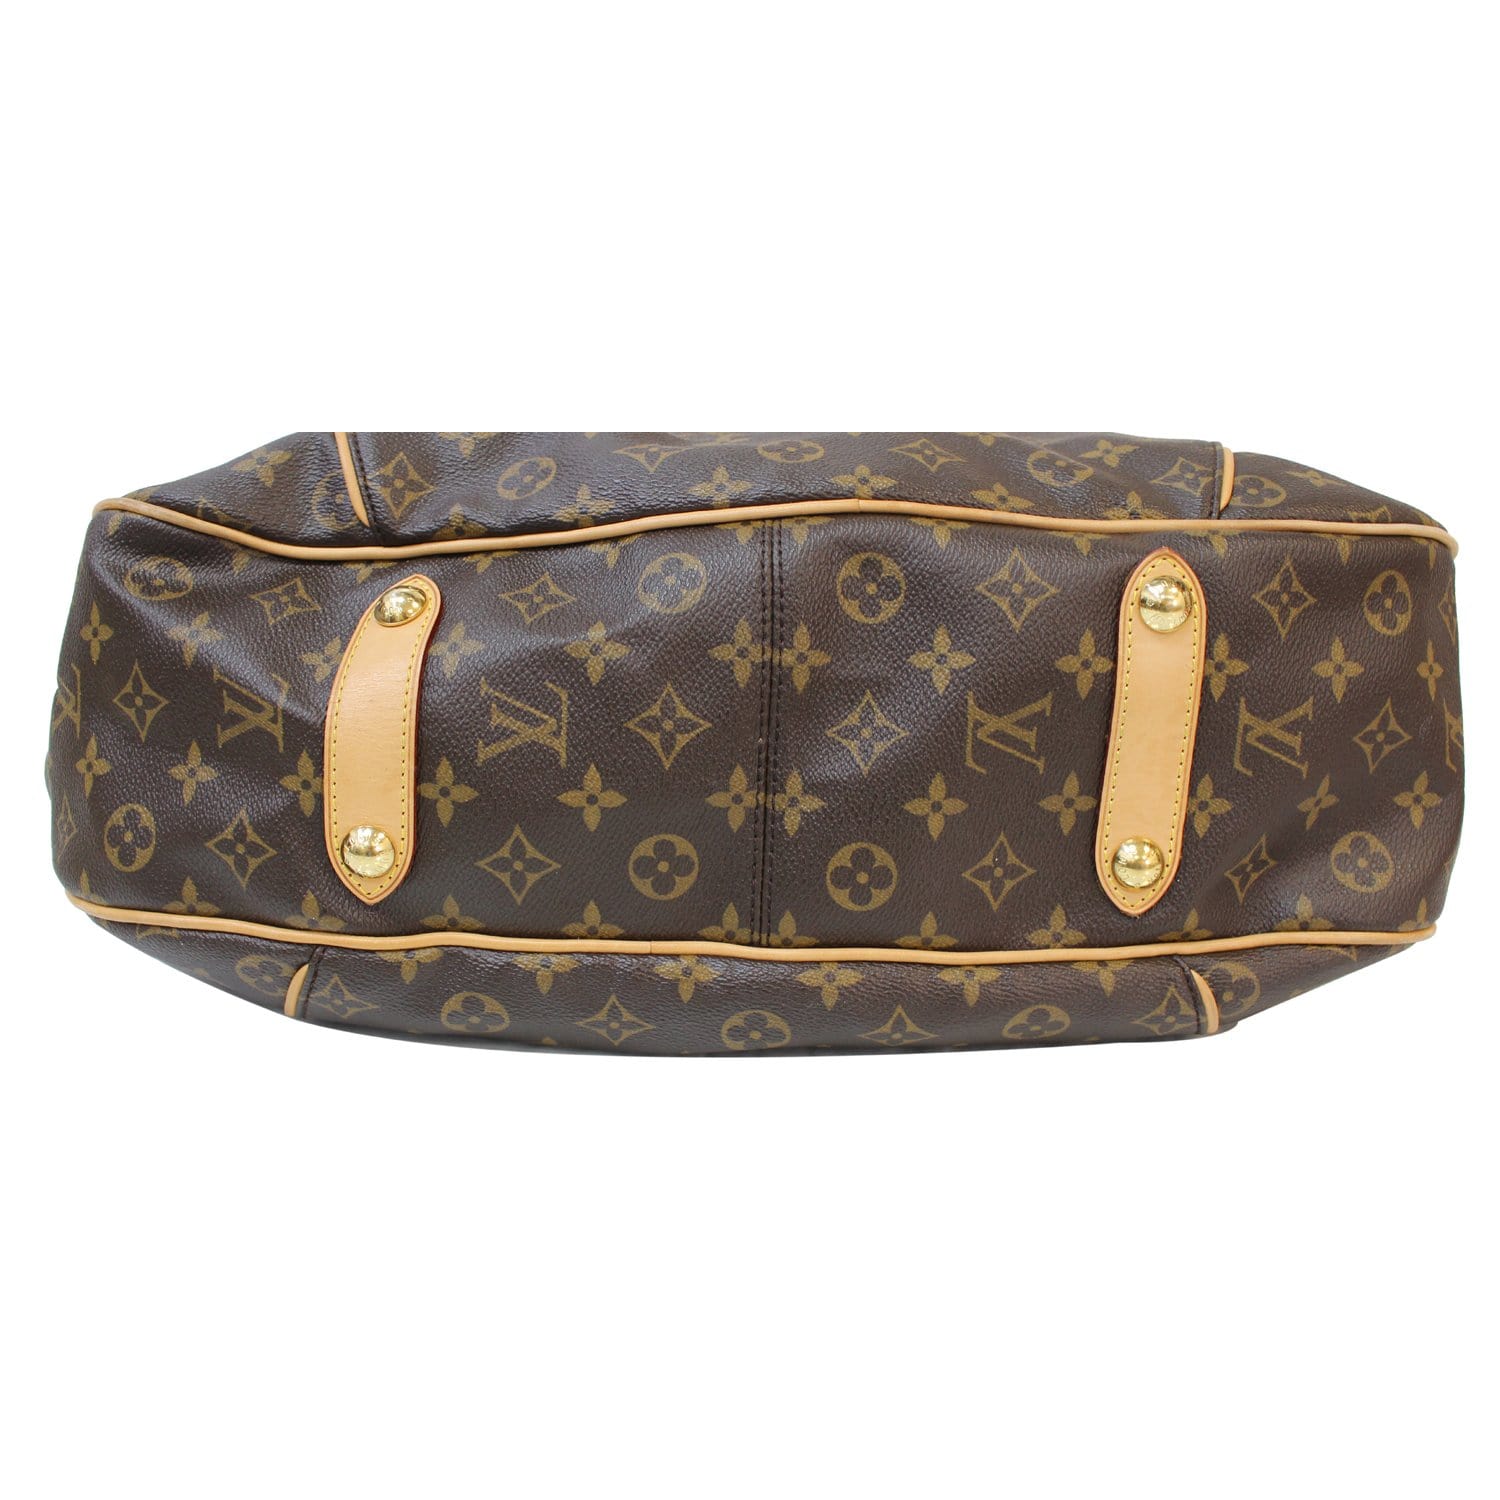 Louis Vuitton Diva, Just got the new Galliera Louie Bag and…